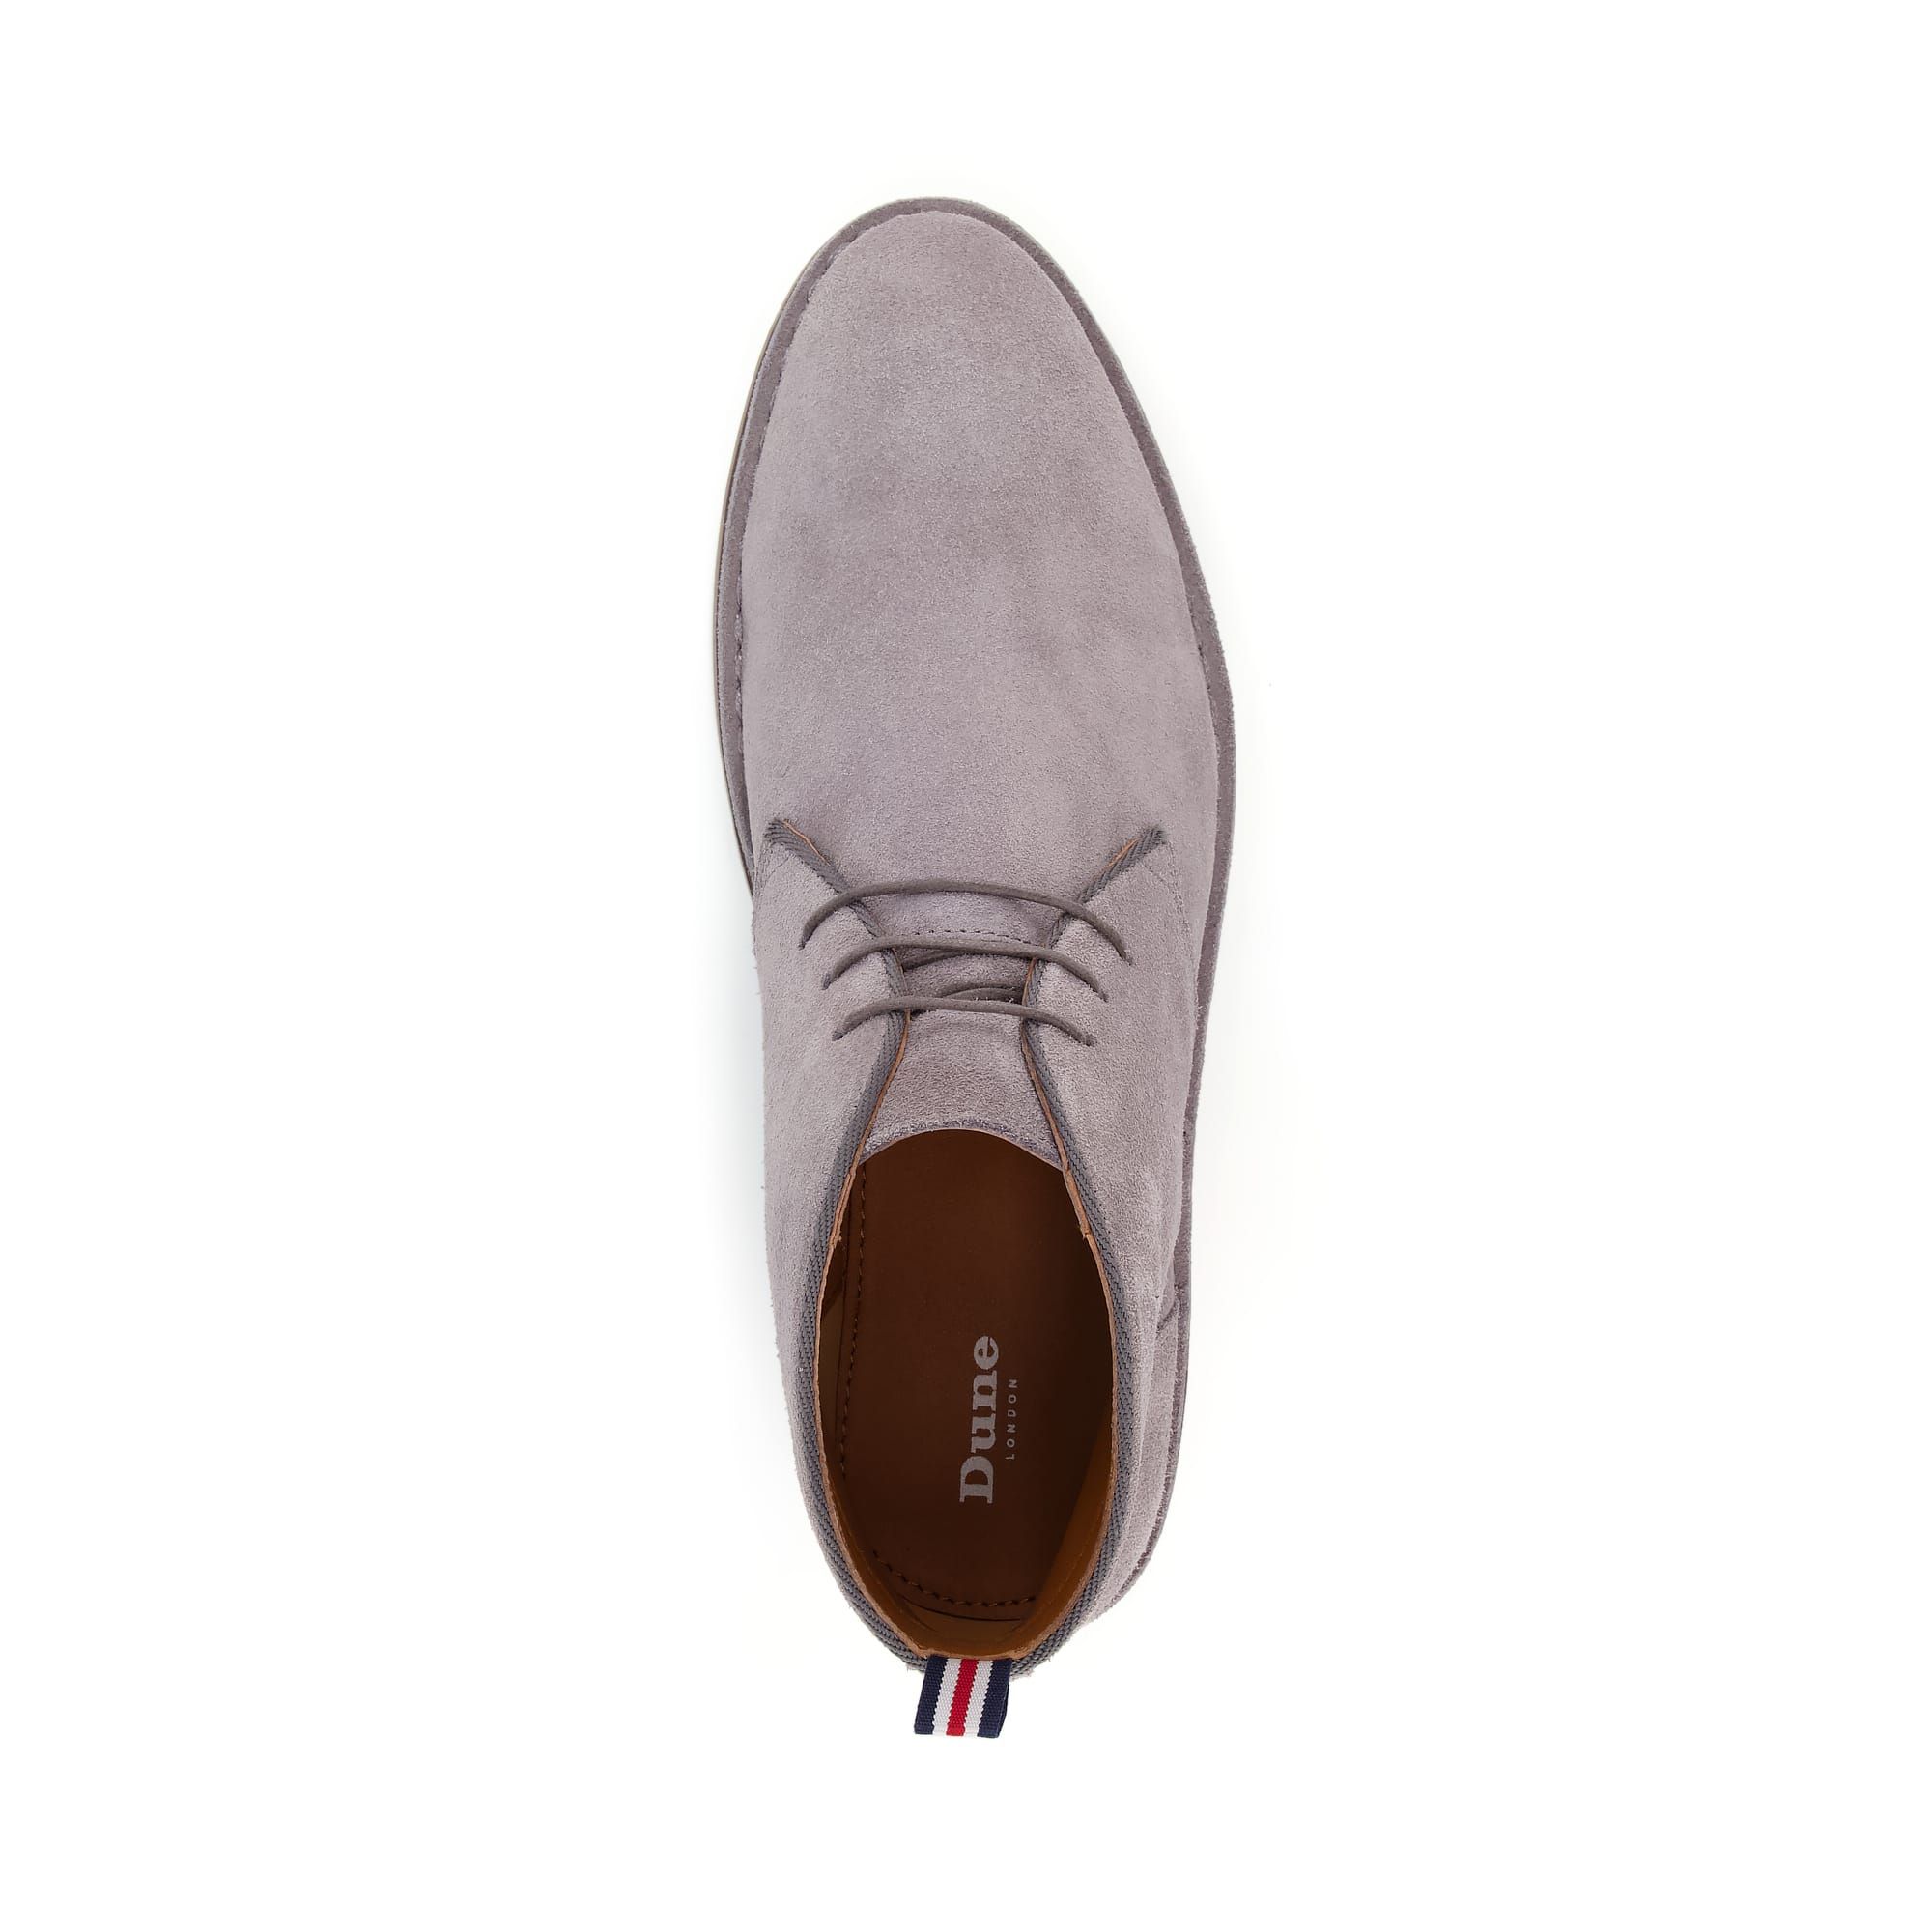 The perfect go-to for everyday casual styling. These versatile desert boots slip on easily thanks to the back pull tab feature. Fastened with lace ups and featuring a practical rubber sole.